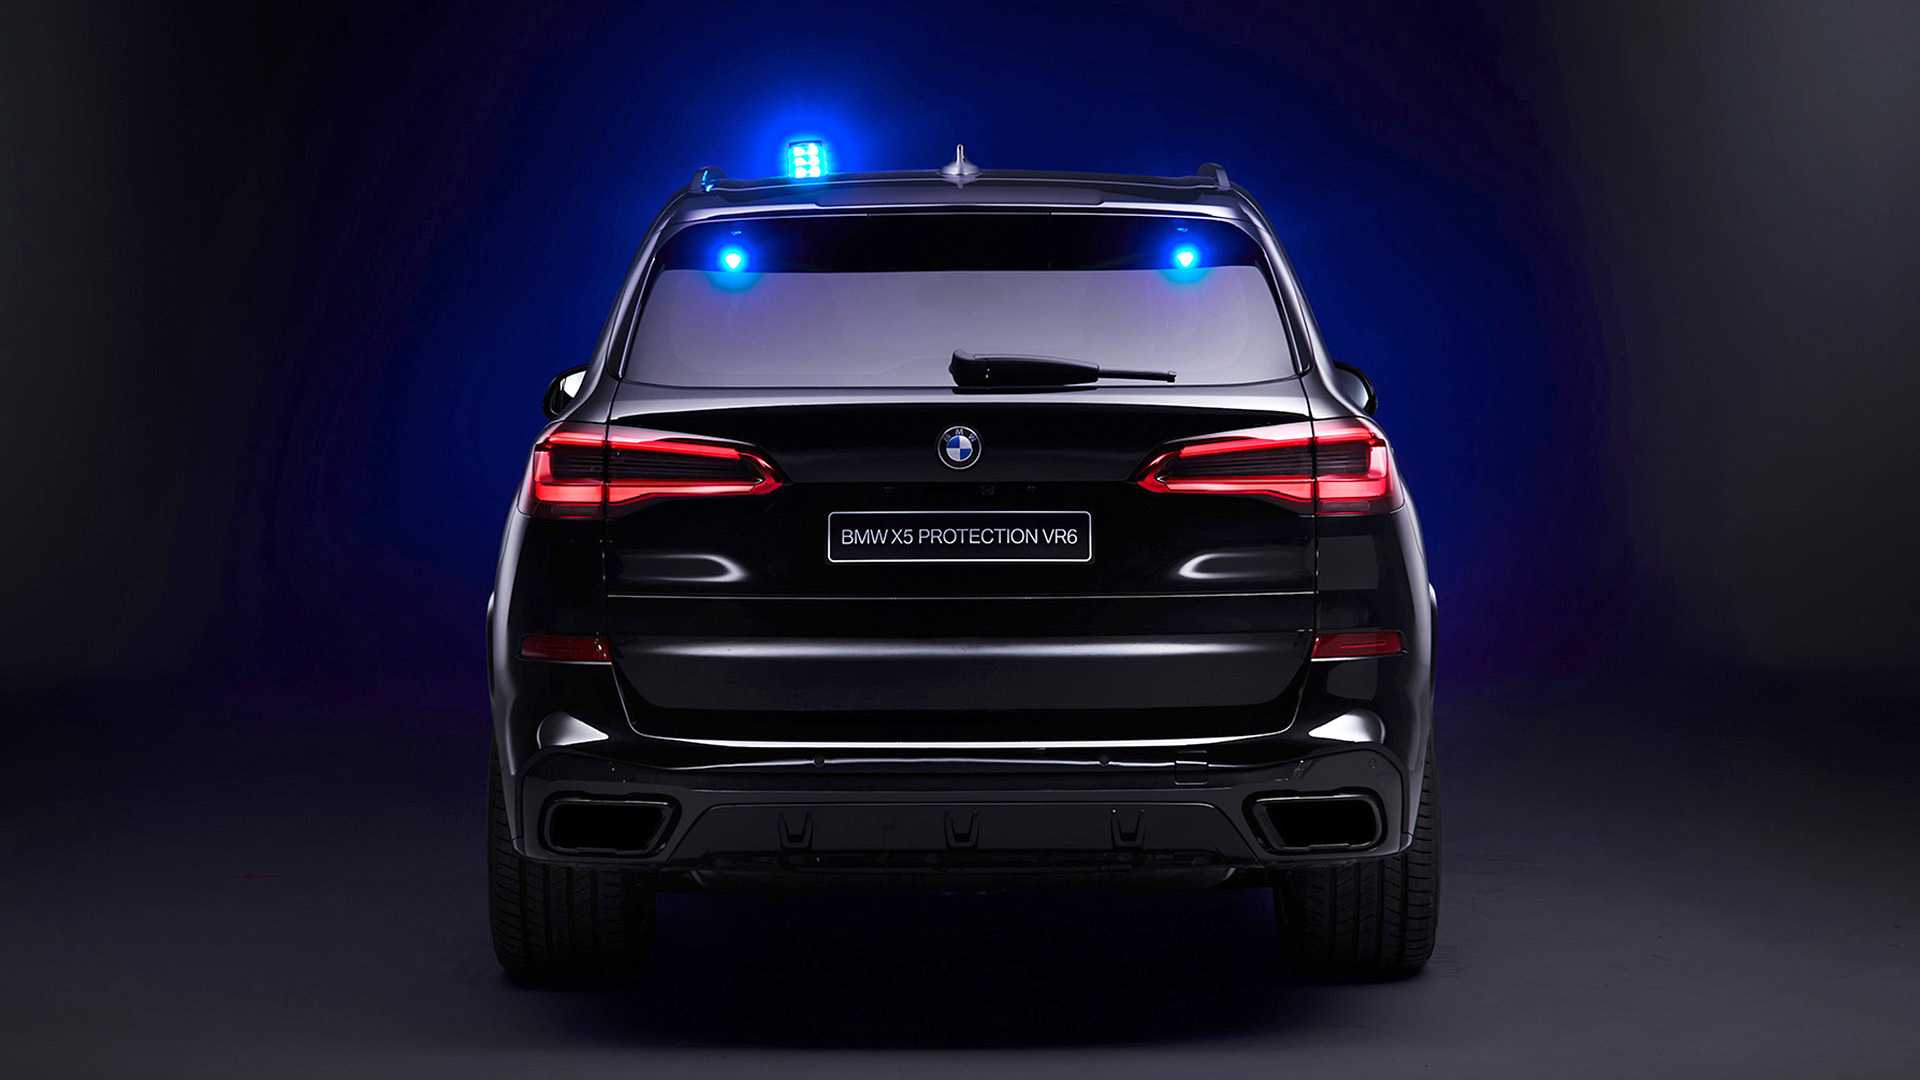 2020 BMW X5 Protection VR6 (Armored Vehicle) Rear Wallpapers #14 of 25